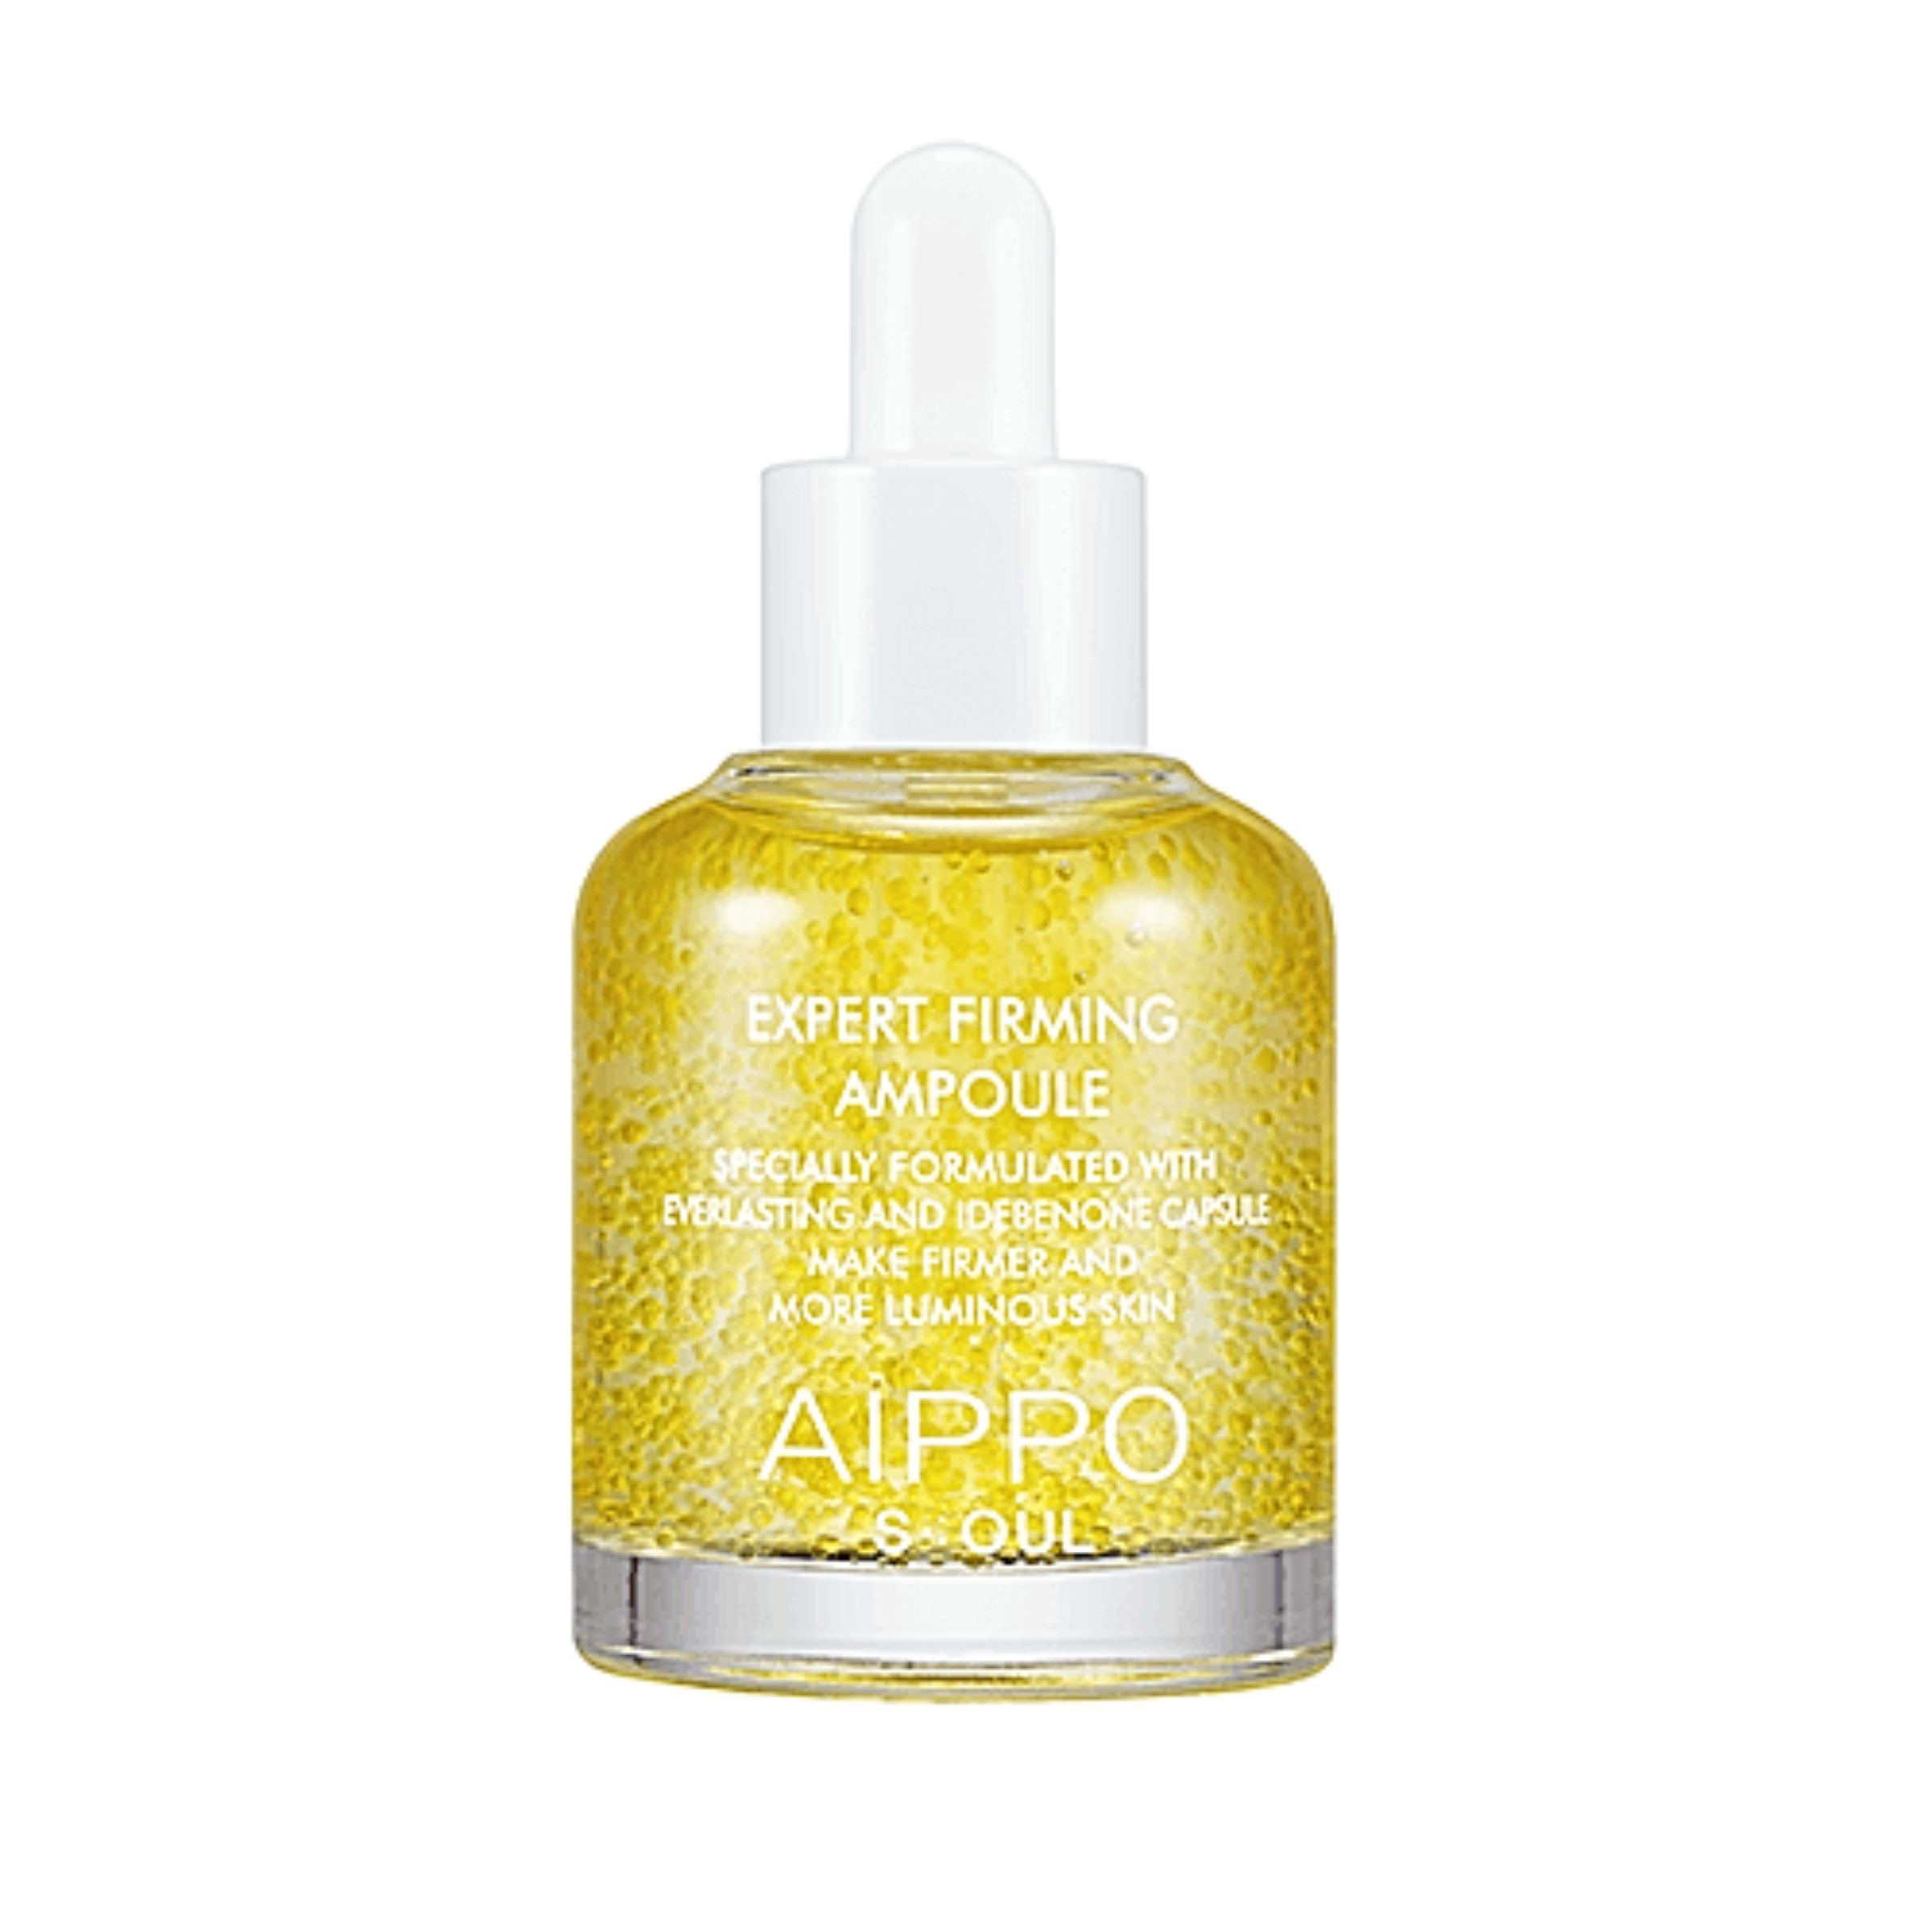 Aippo Seoul - Expert Firming Ampoule